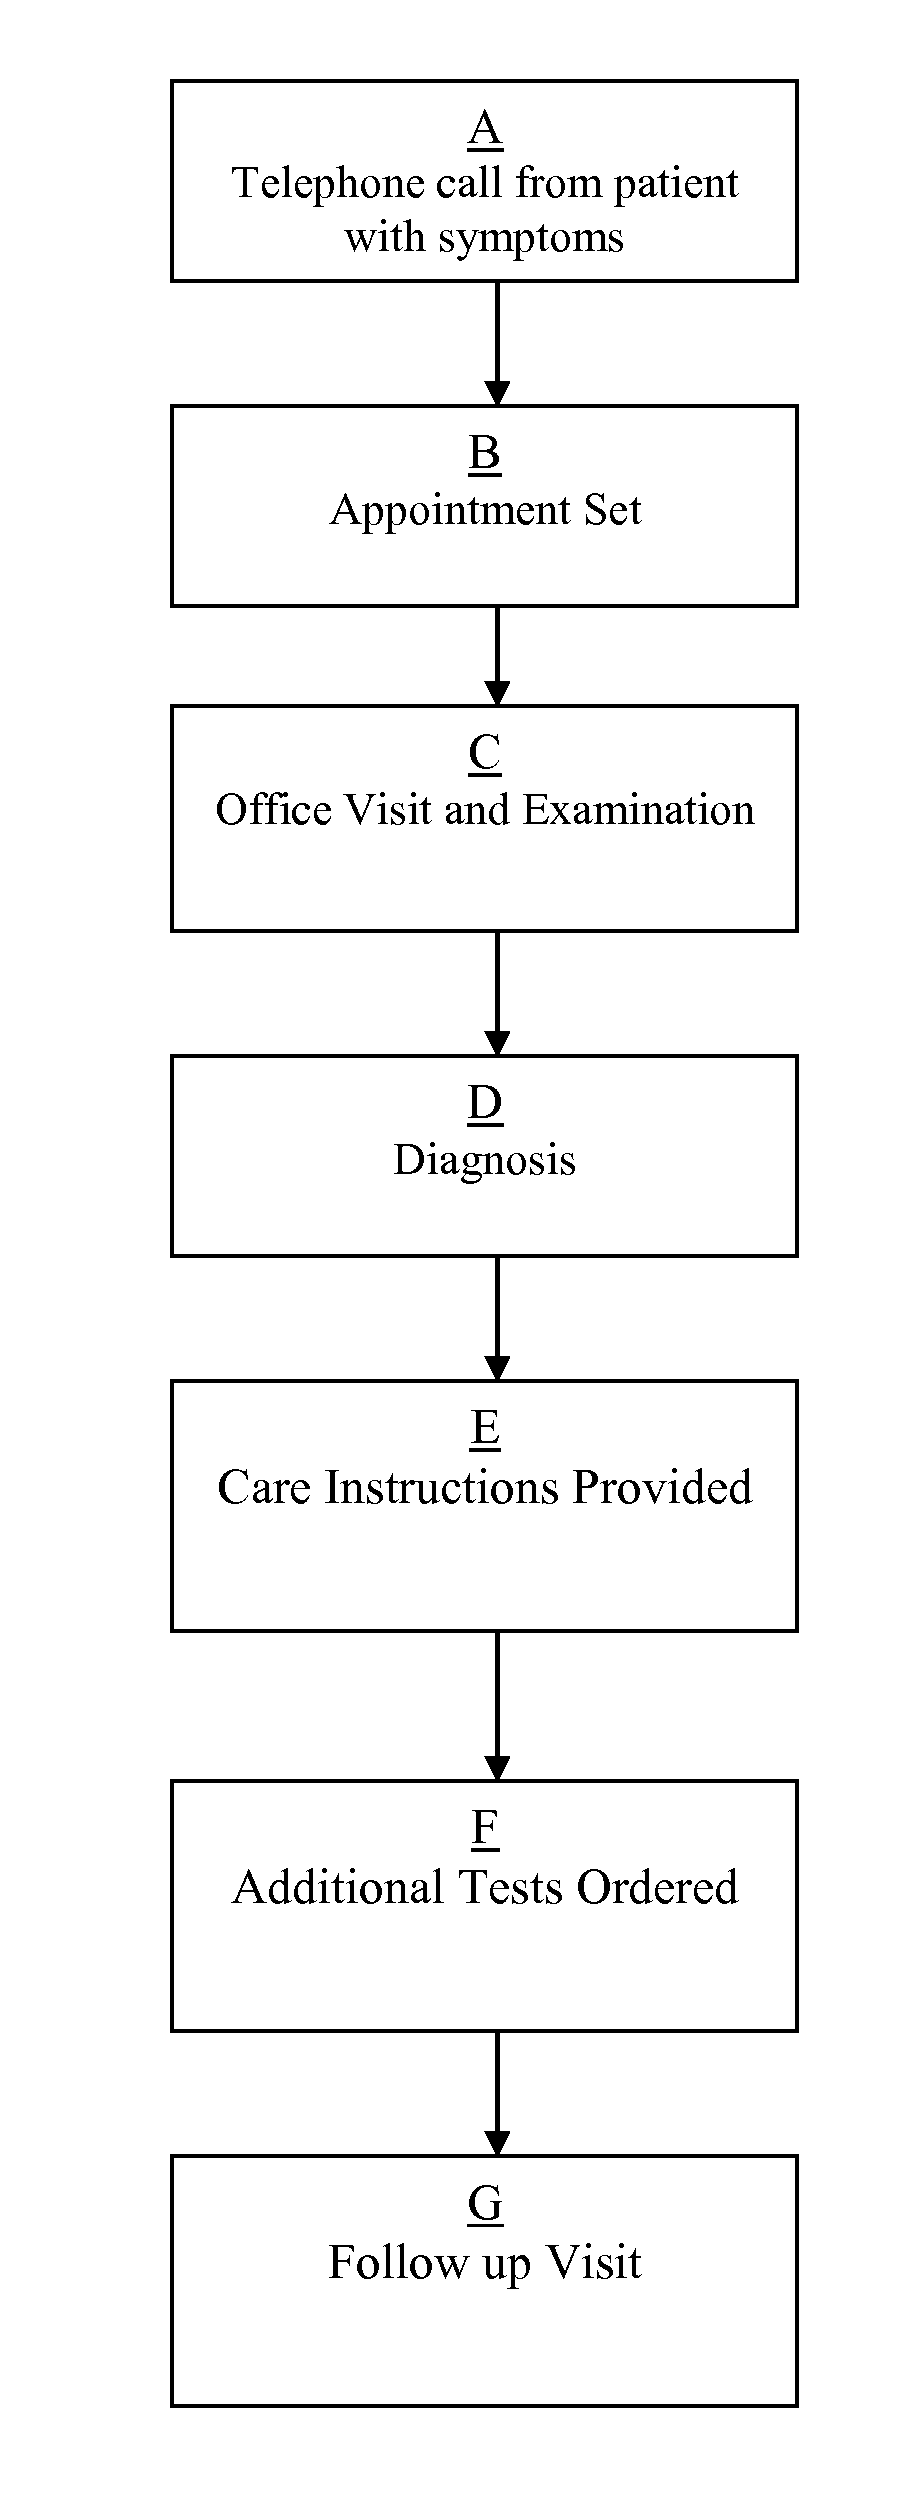 Keystroke coded template for creating medical records